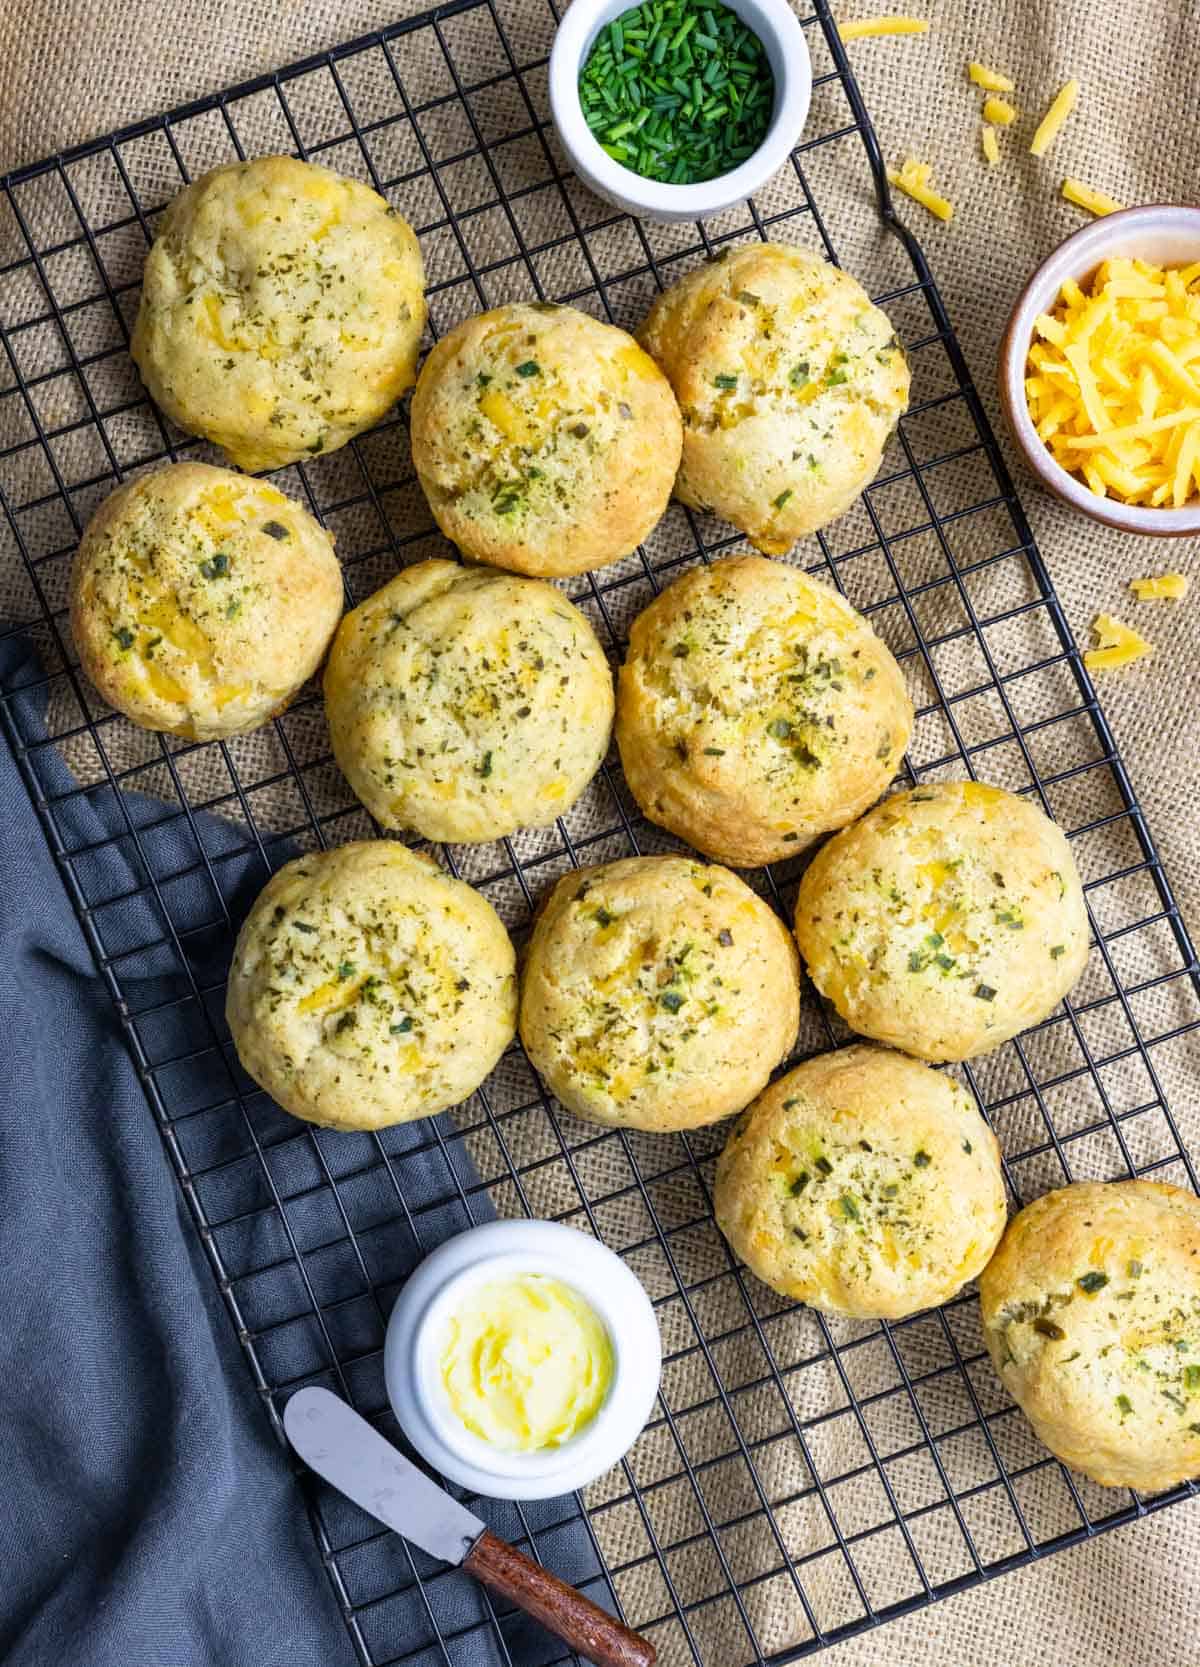 Cheddar biscuits cooling on a black rack with small cups of chives, cheese and butter on the side.